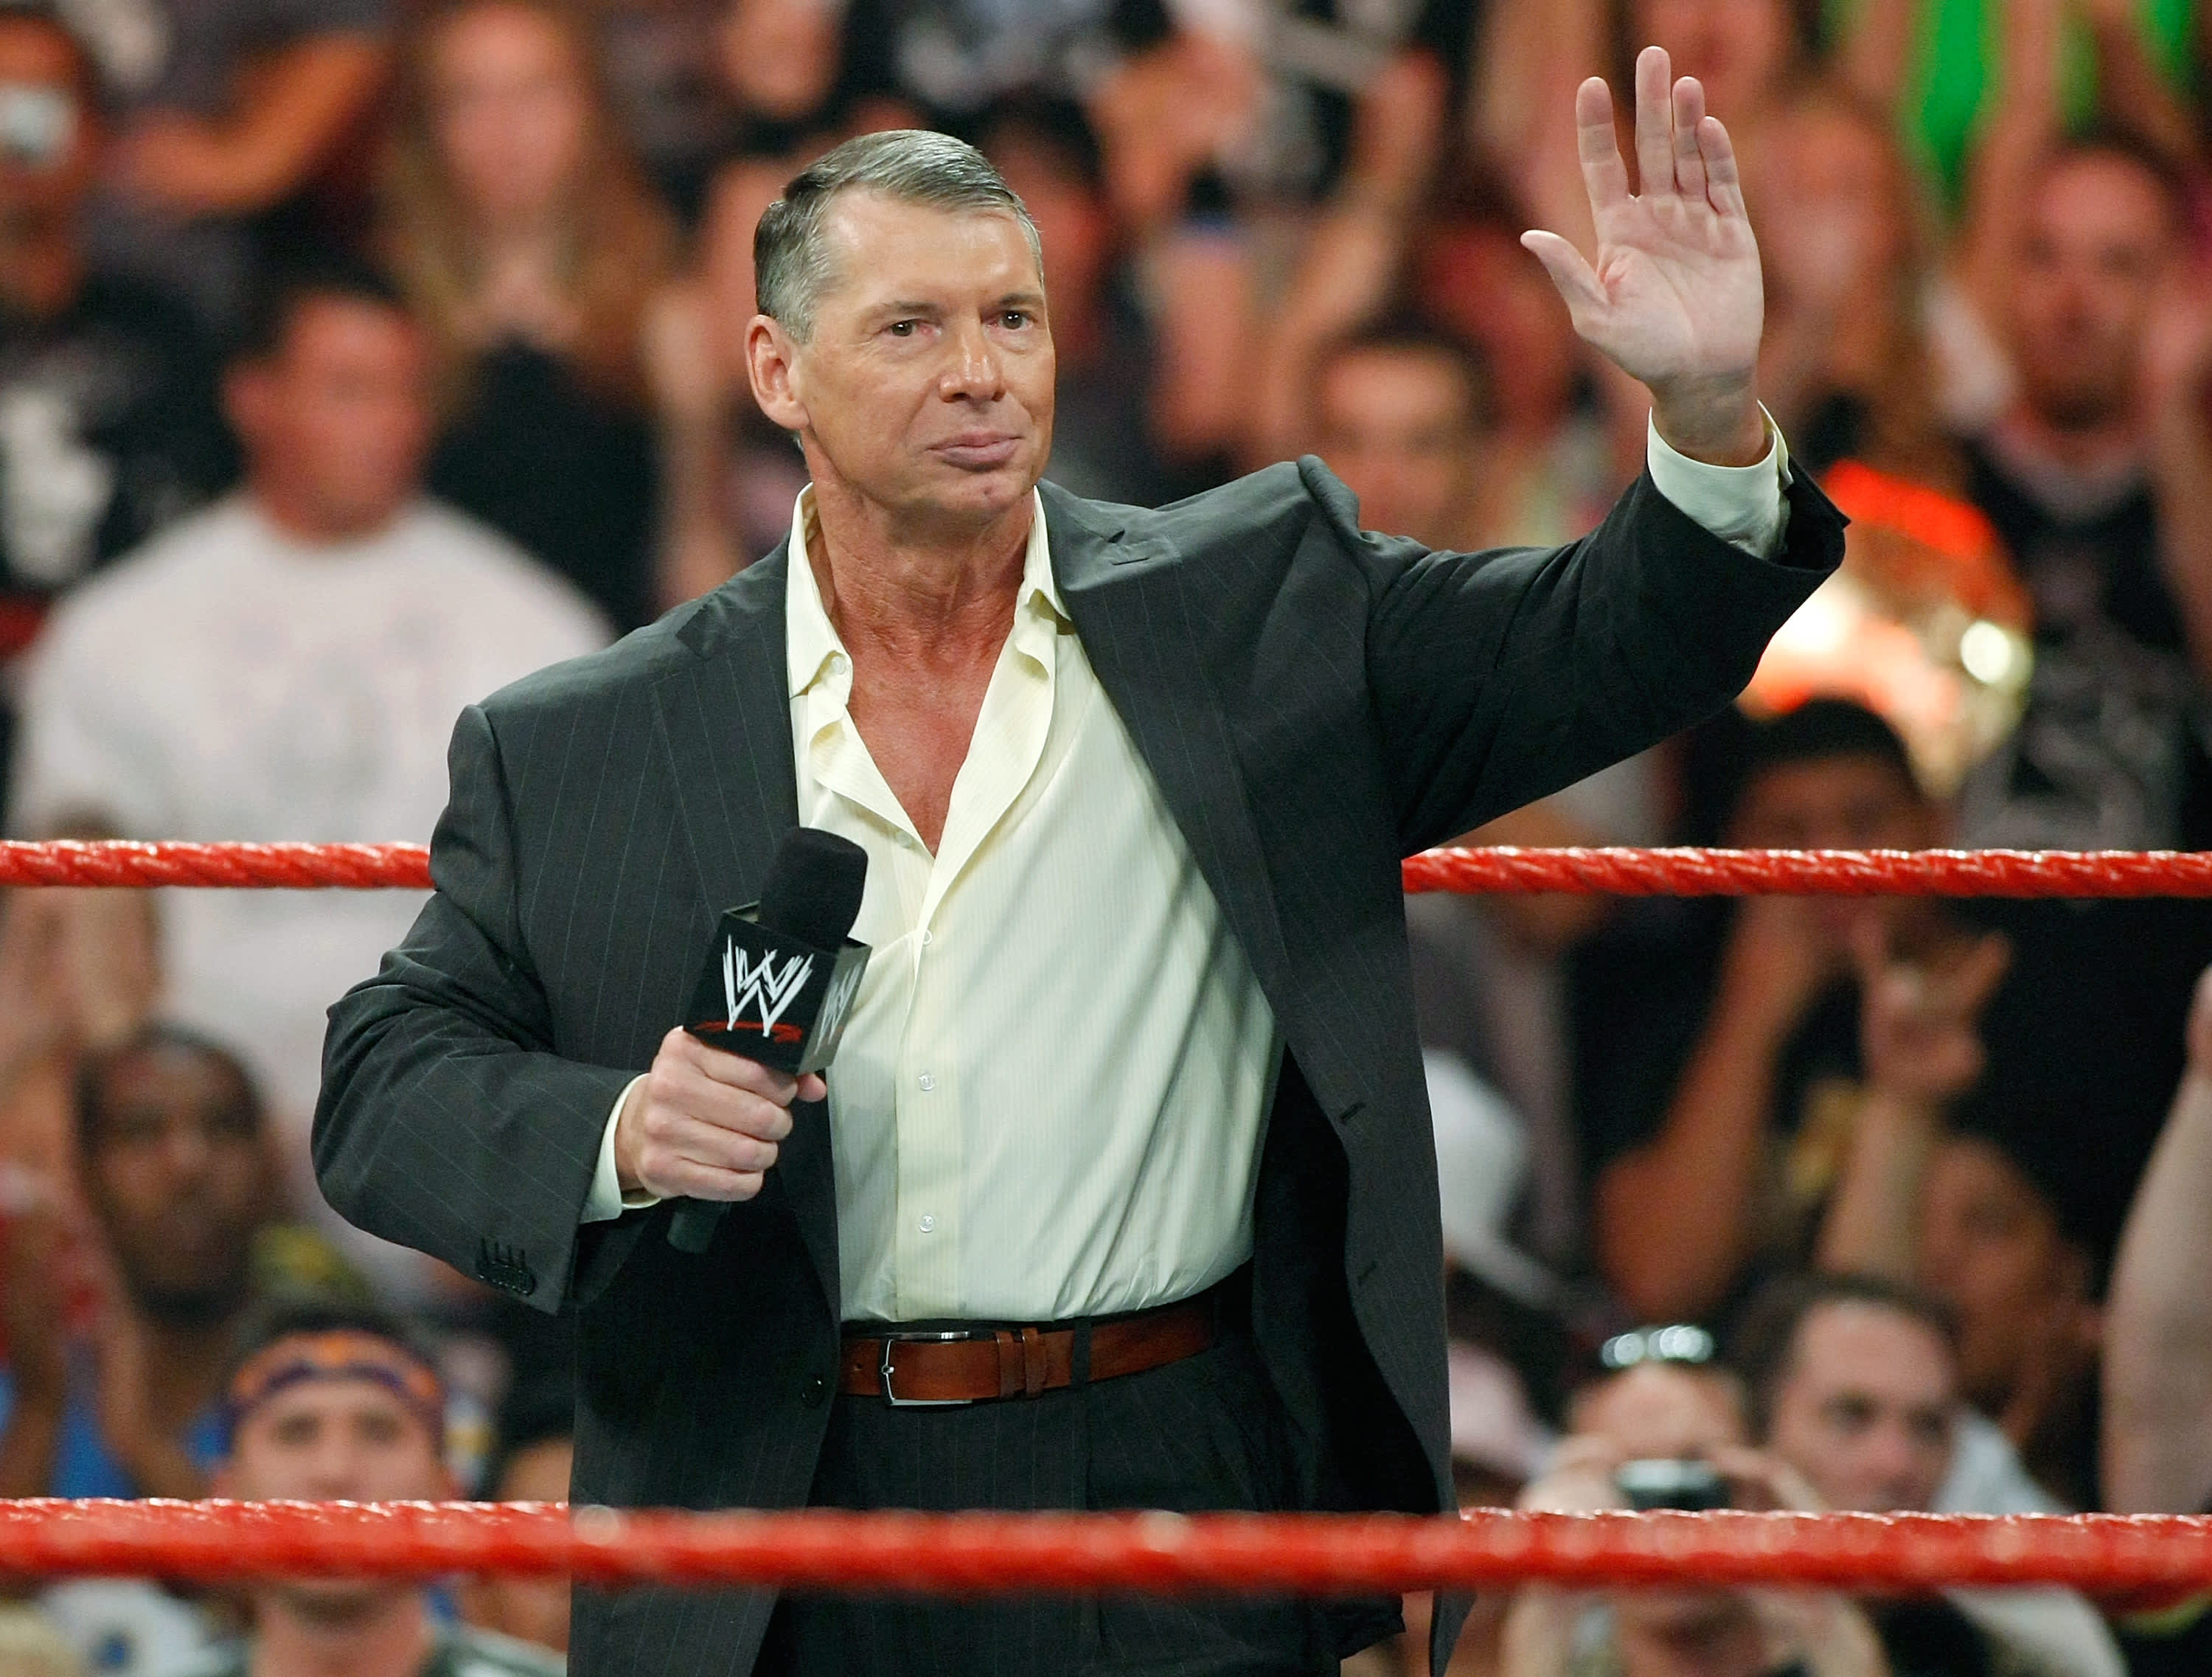 Wolfe Research says WWE shares could rally 30% following Vince McMahon's return